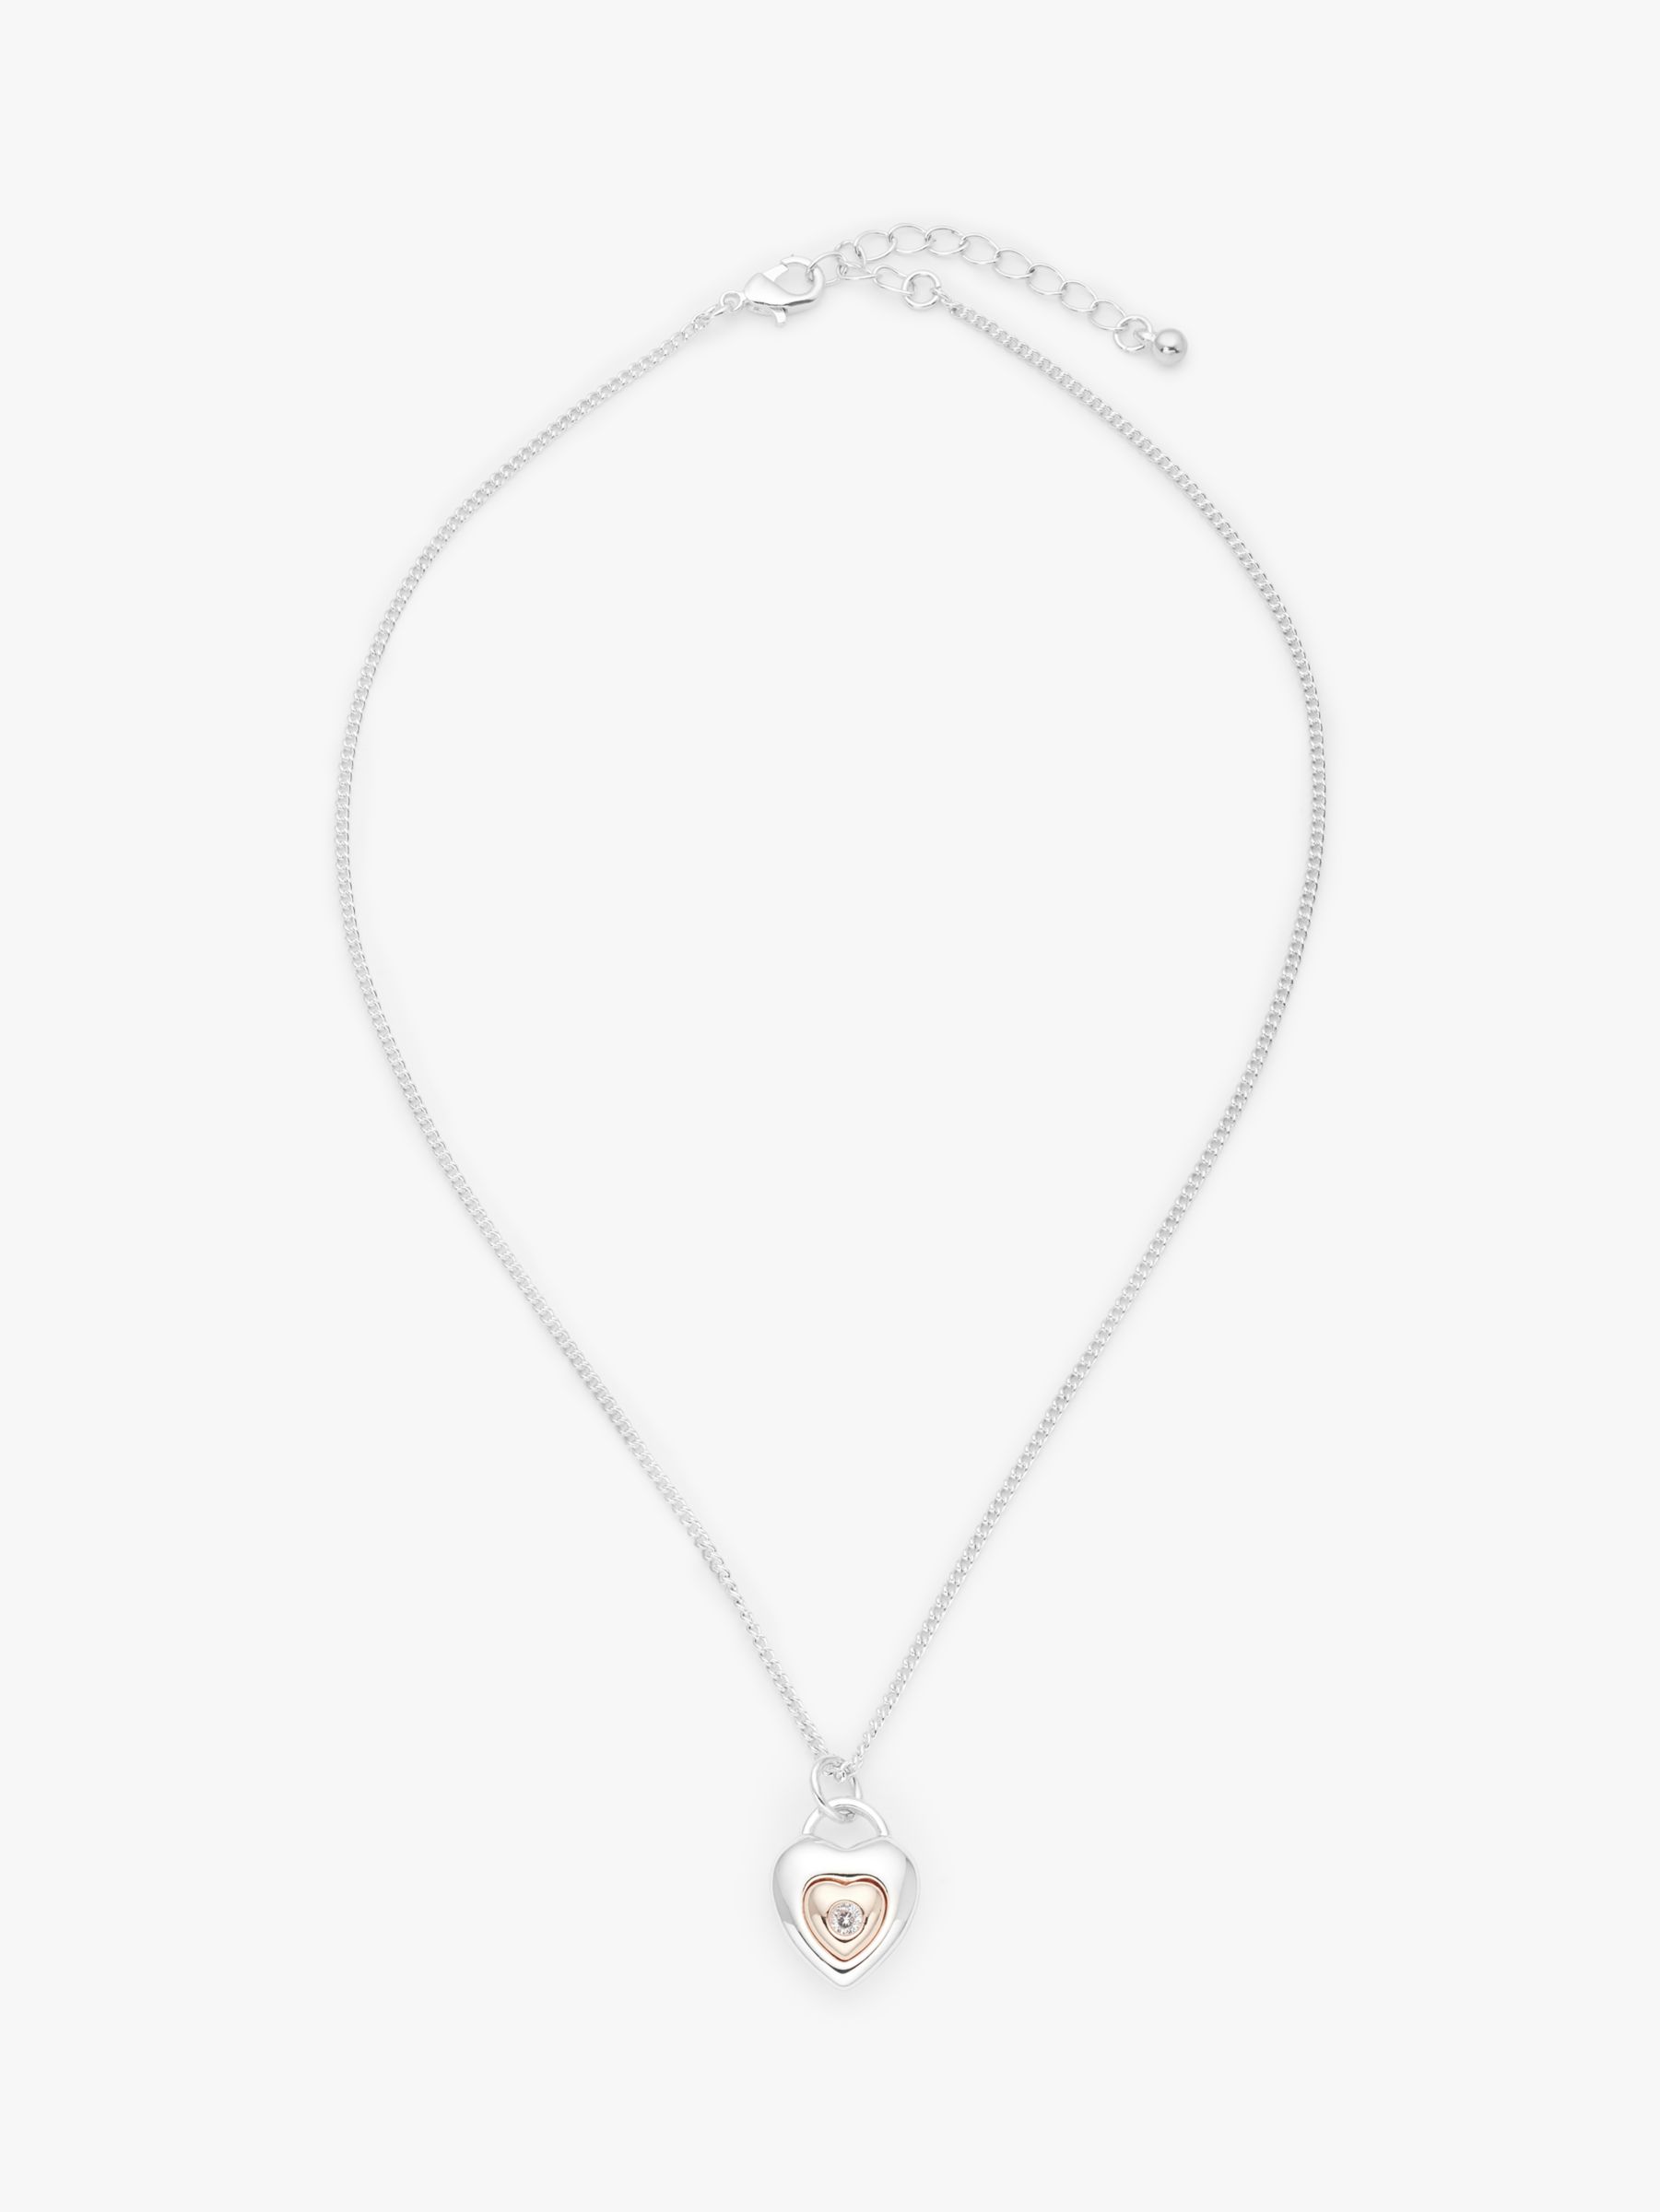 John Lewis & Partners Children's Puff Heart Necklace, Gold/Silver at ...